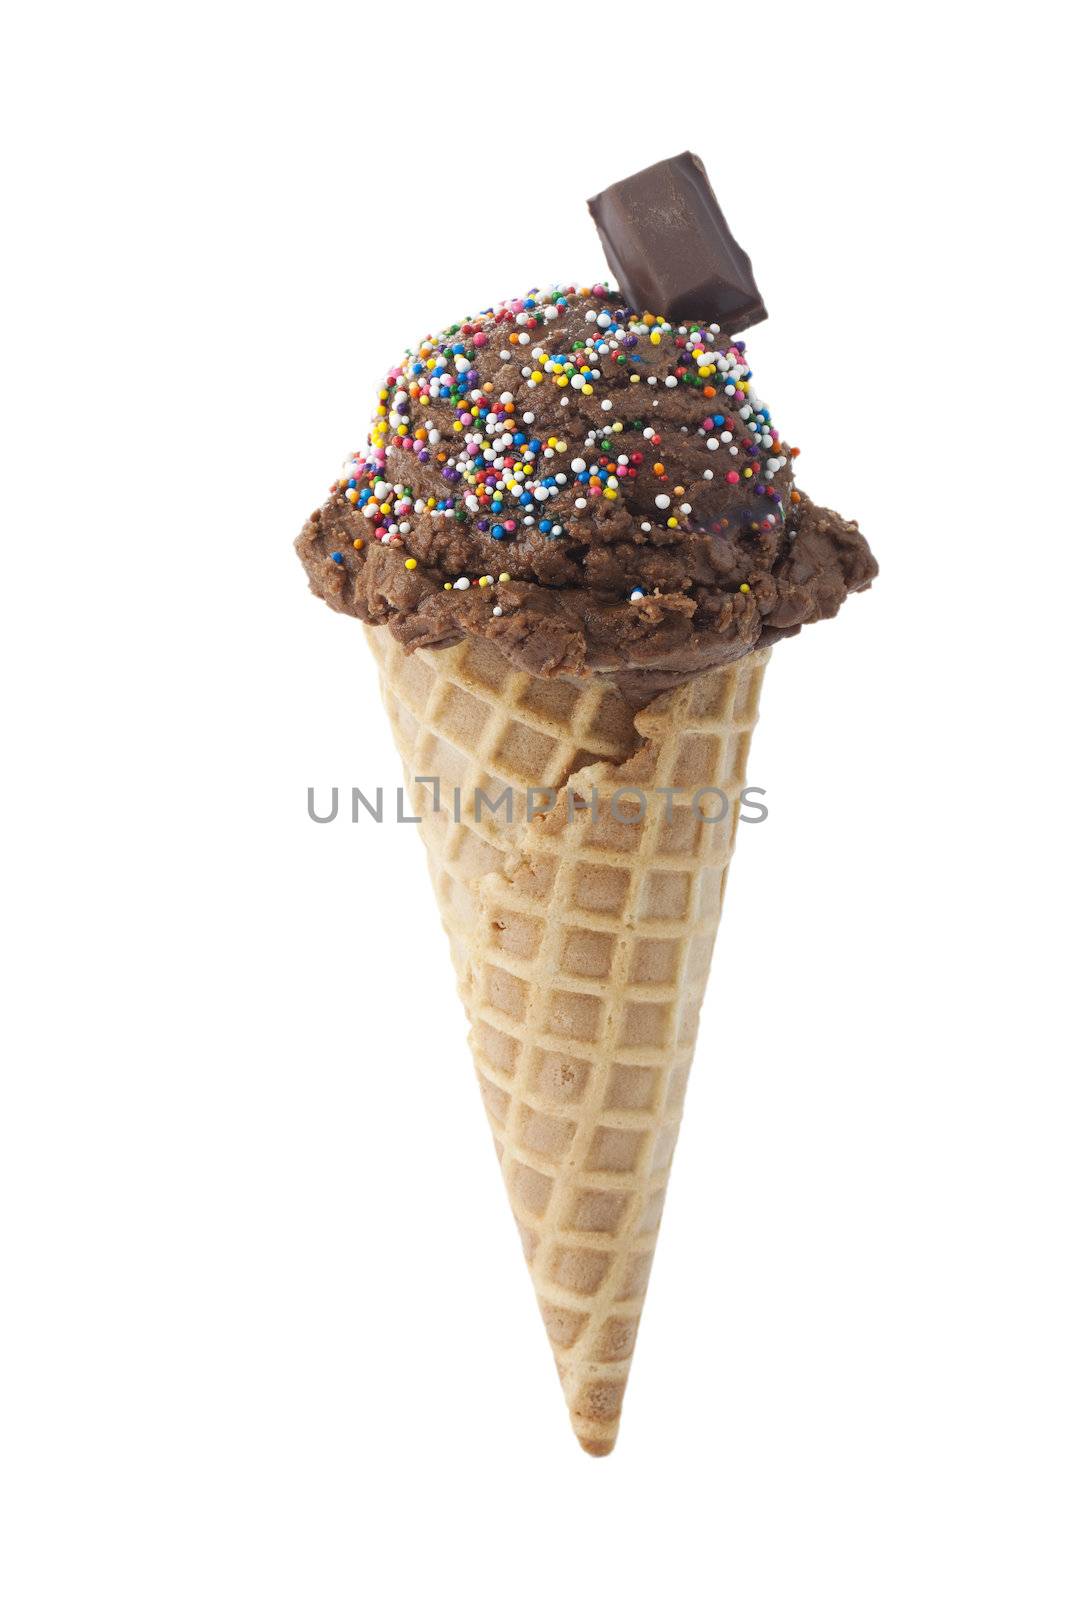 Cone of chocolate ice cream with sprinkles and chocolate chunk on top over a white background